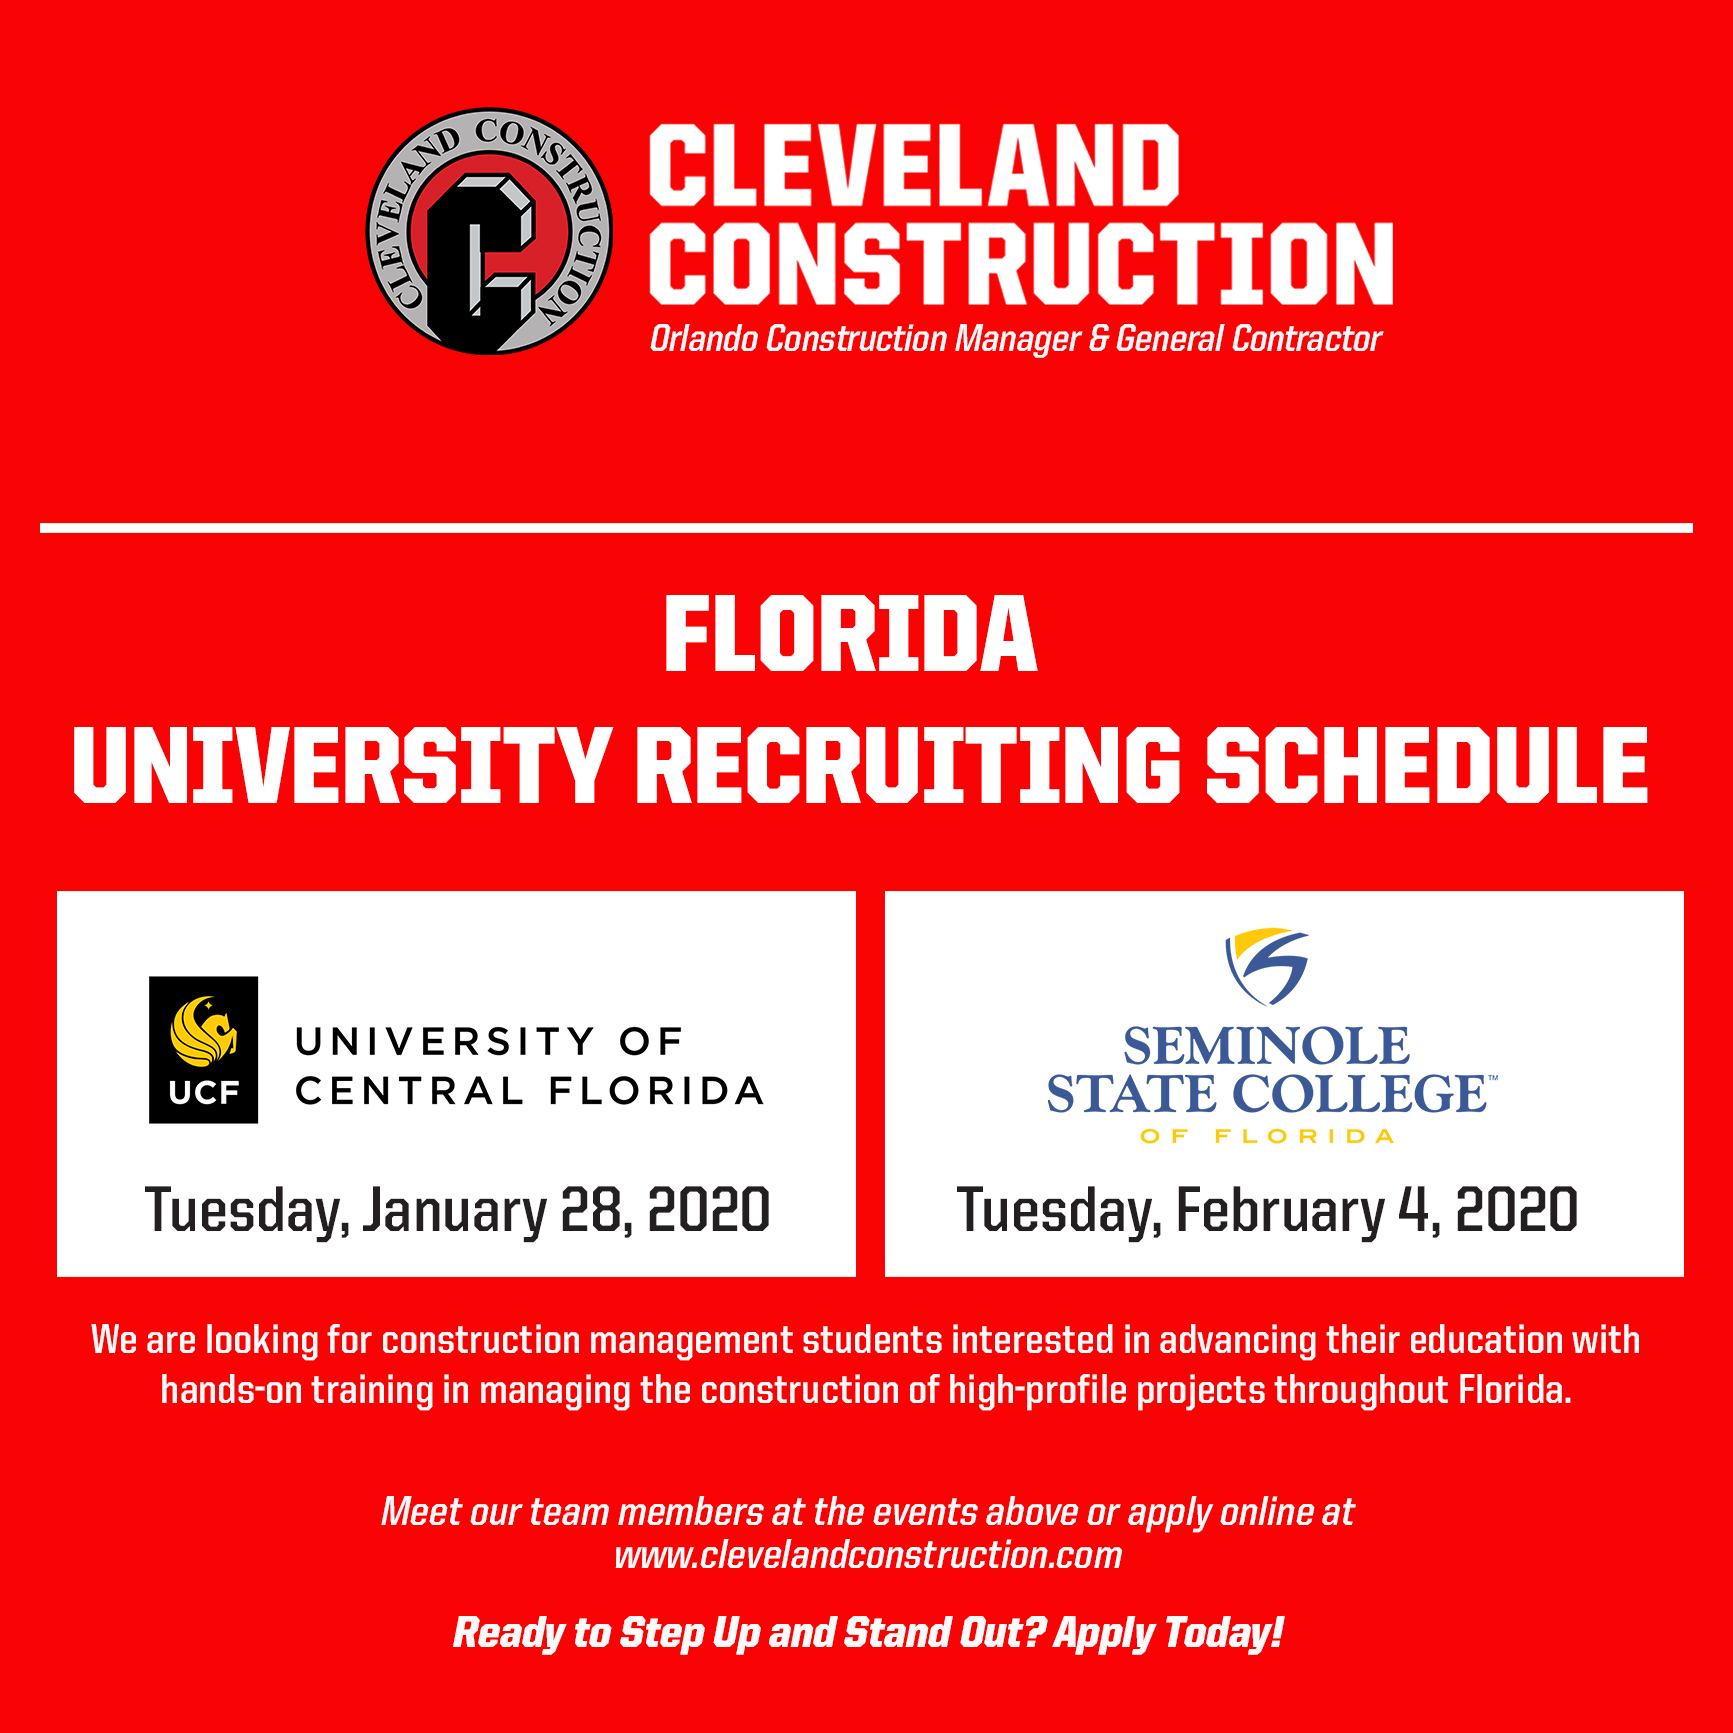 University Recruiting Events in Florida